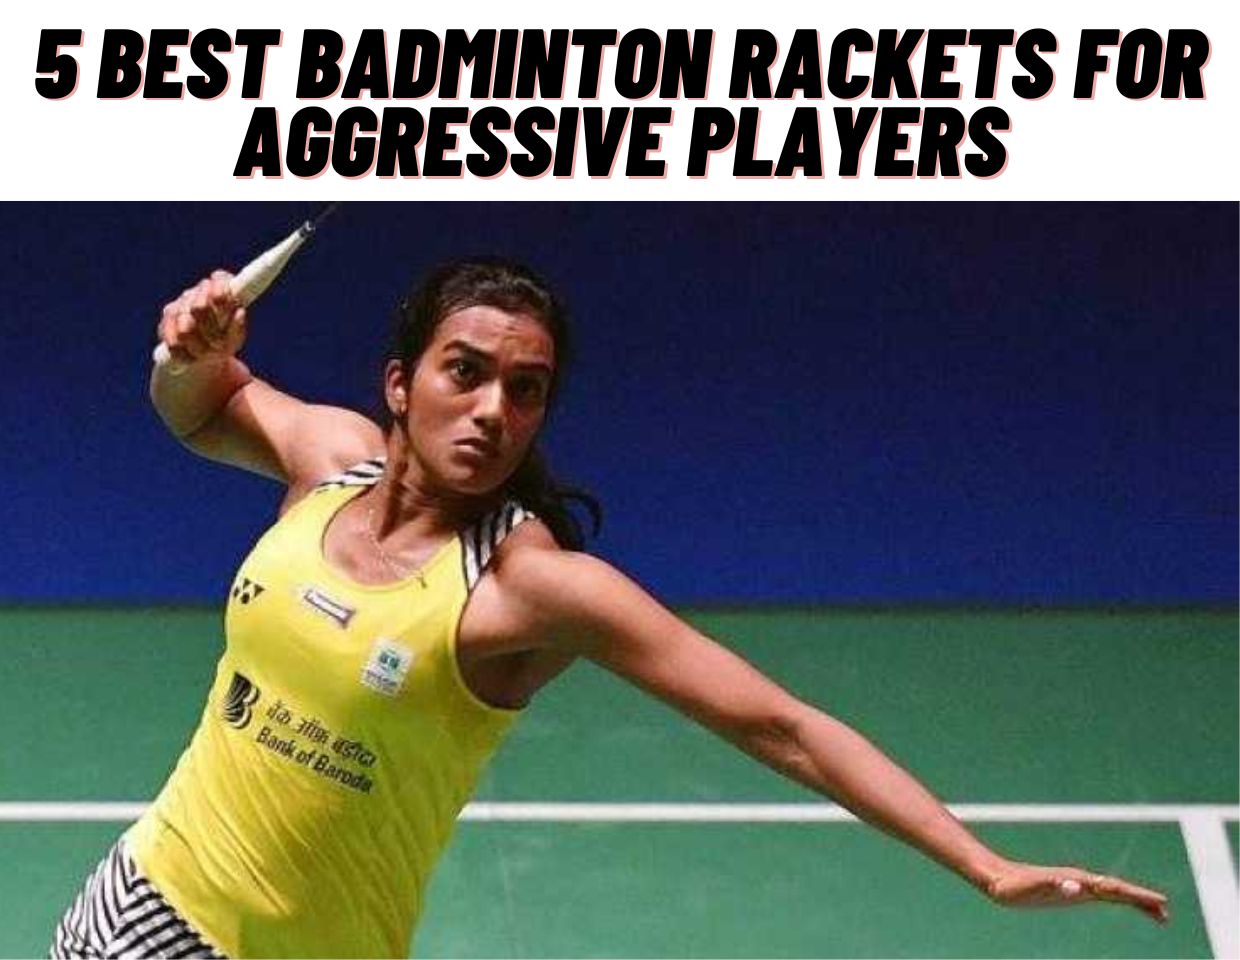 5 Best Badminton Rackets For Aggressive Players